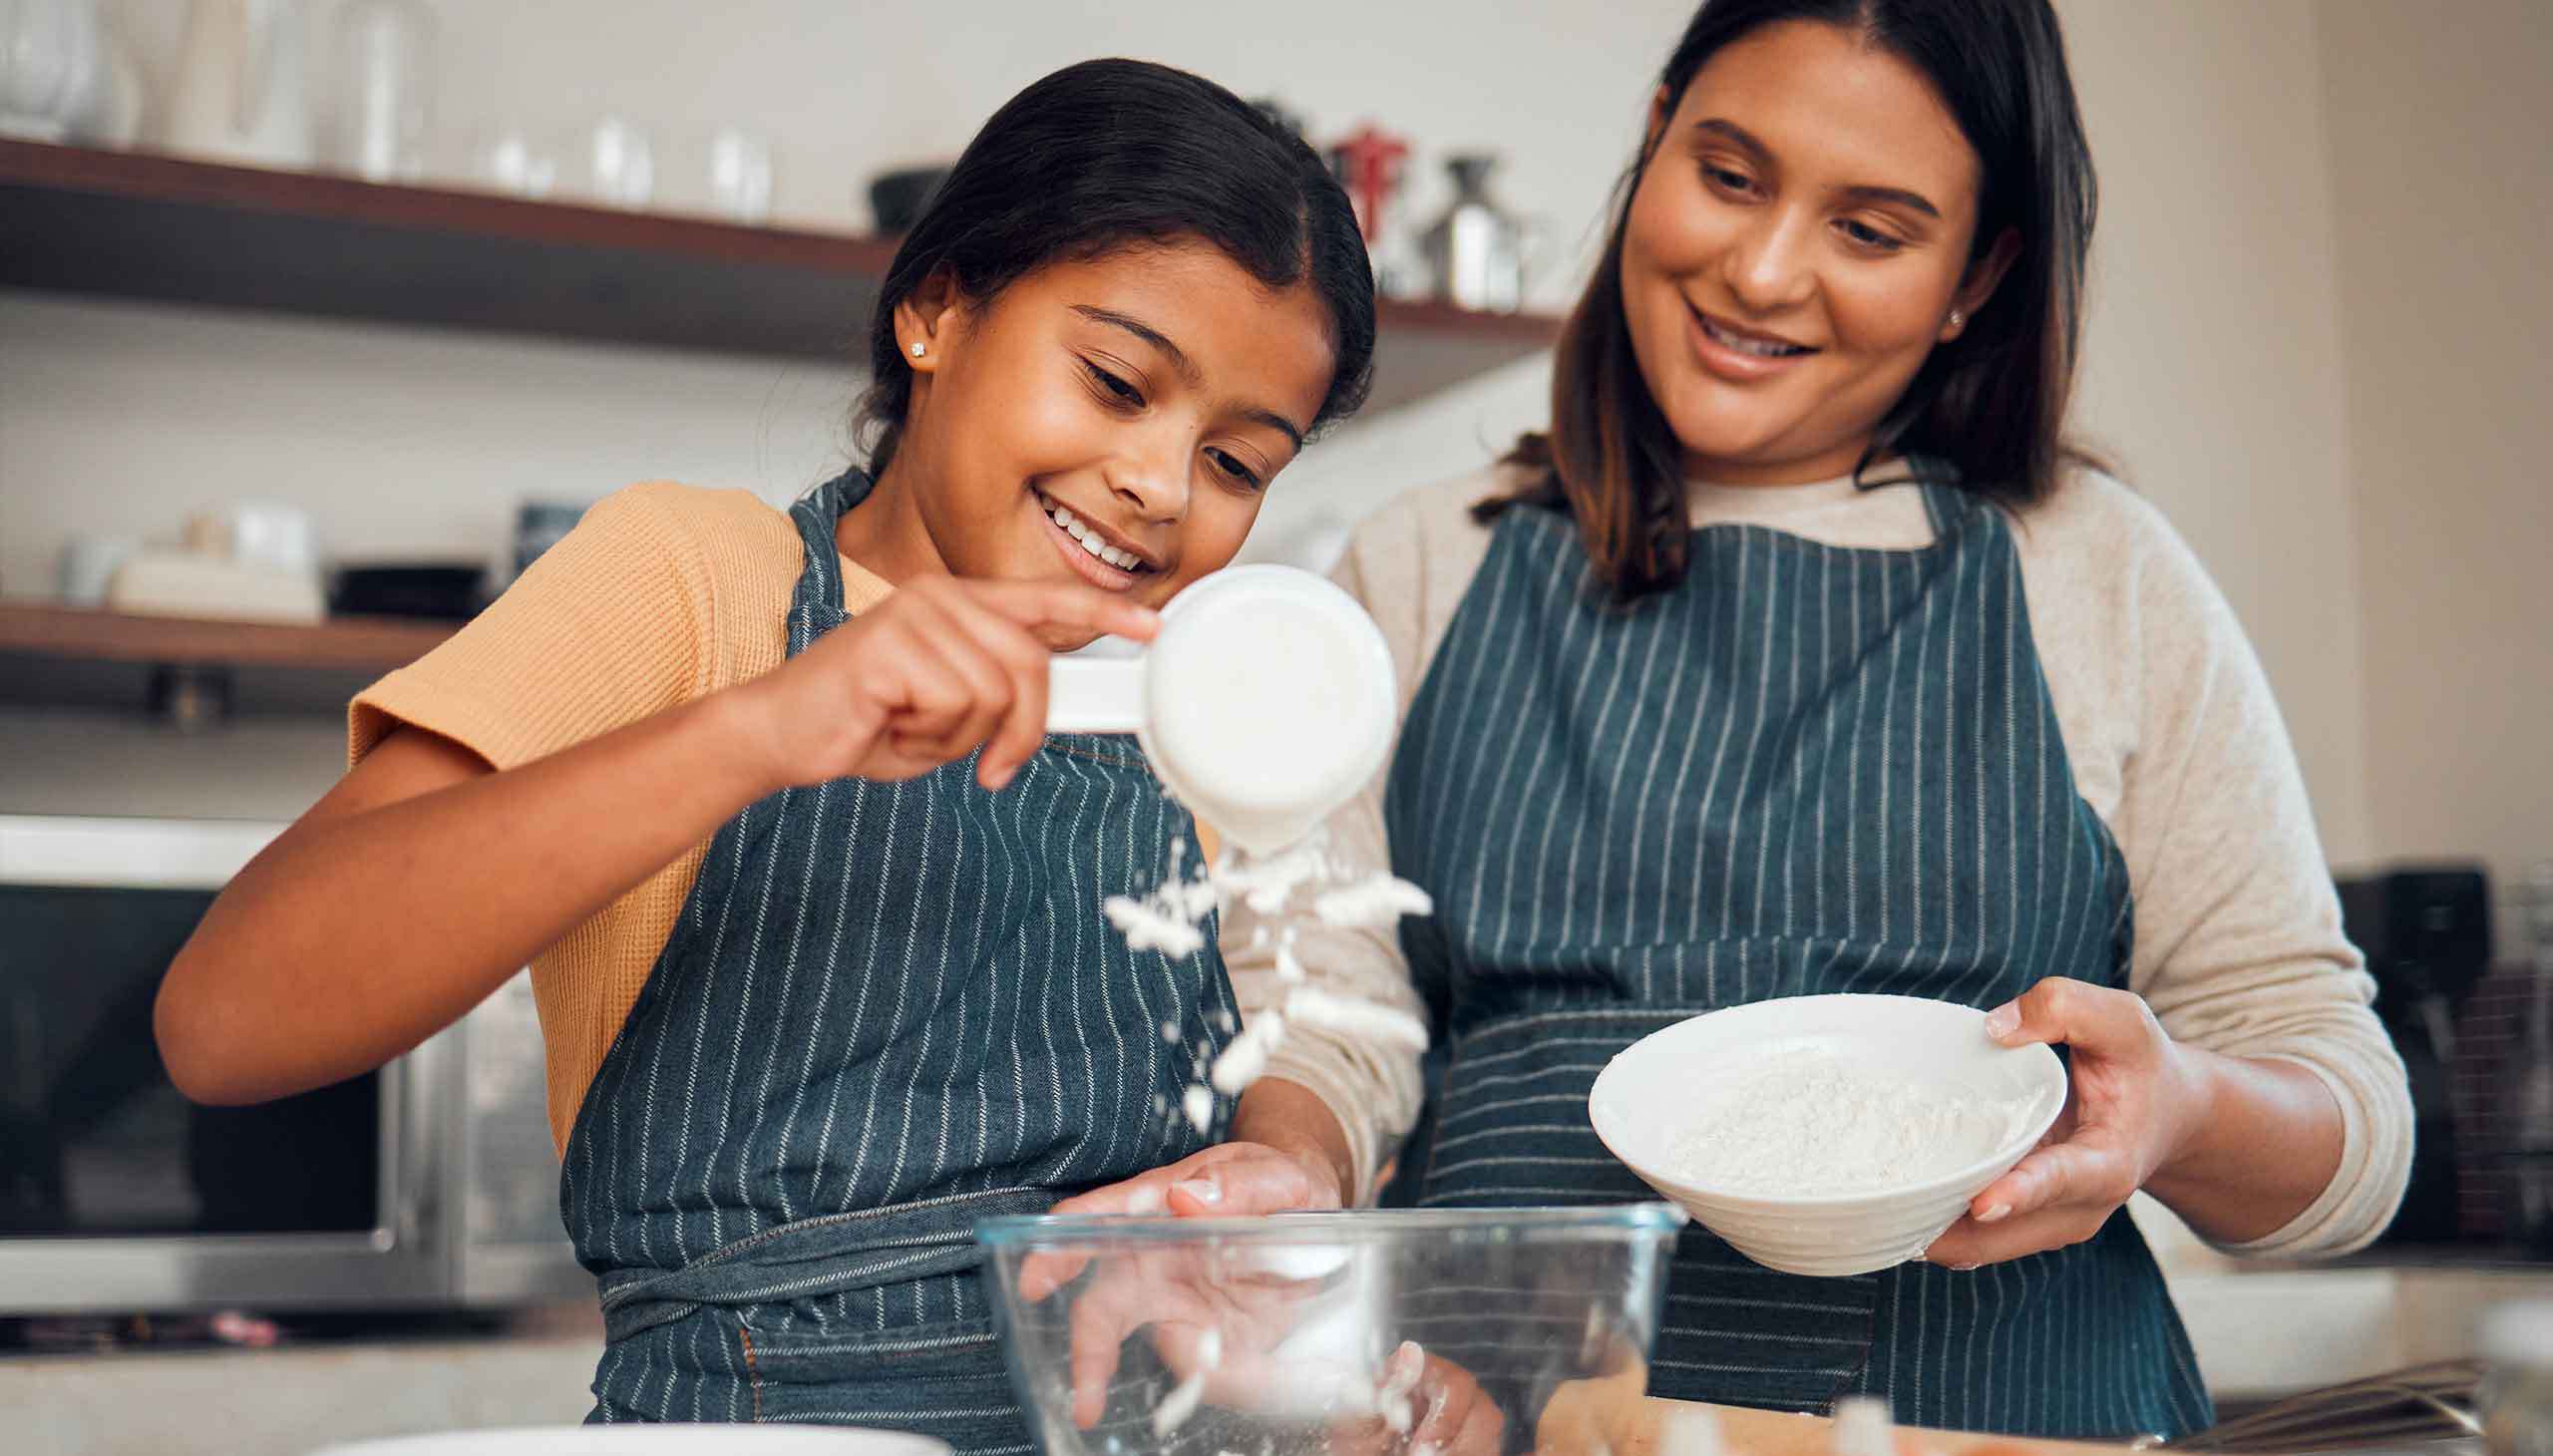 Children's cookery course